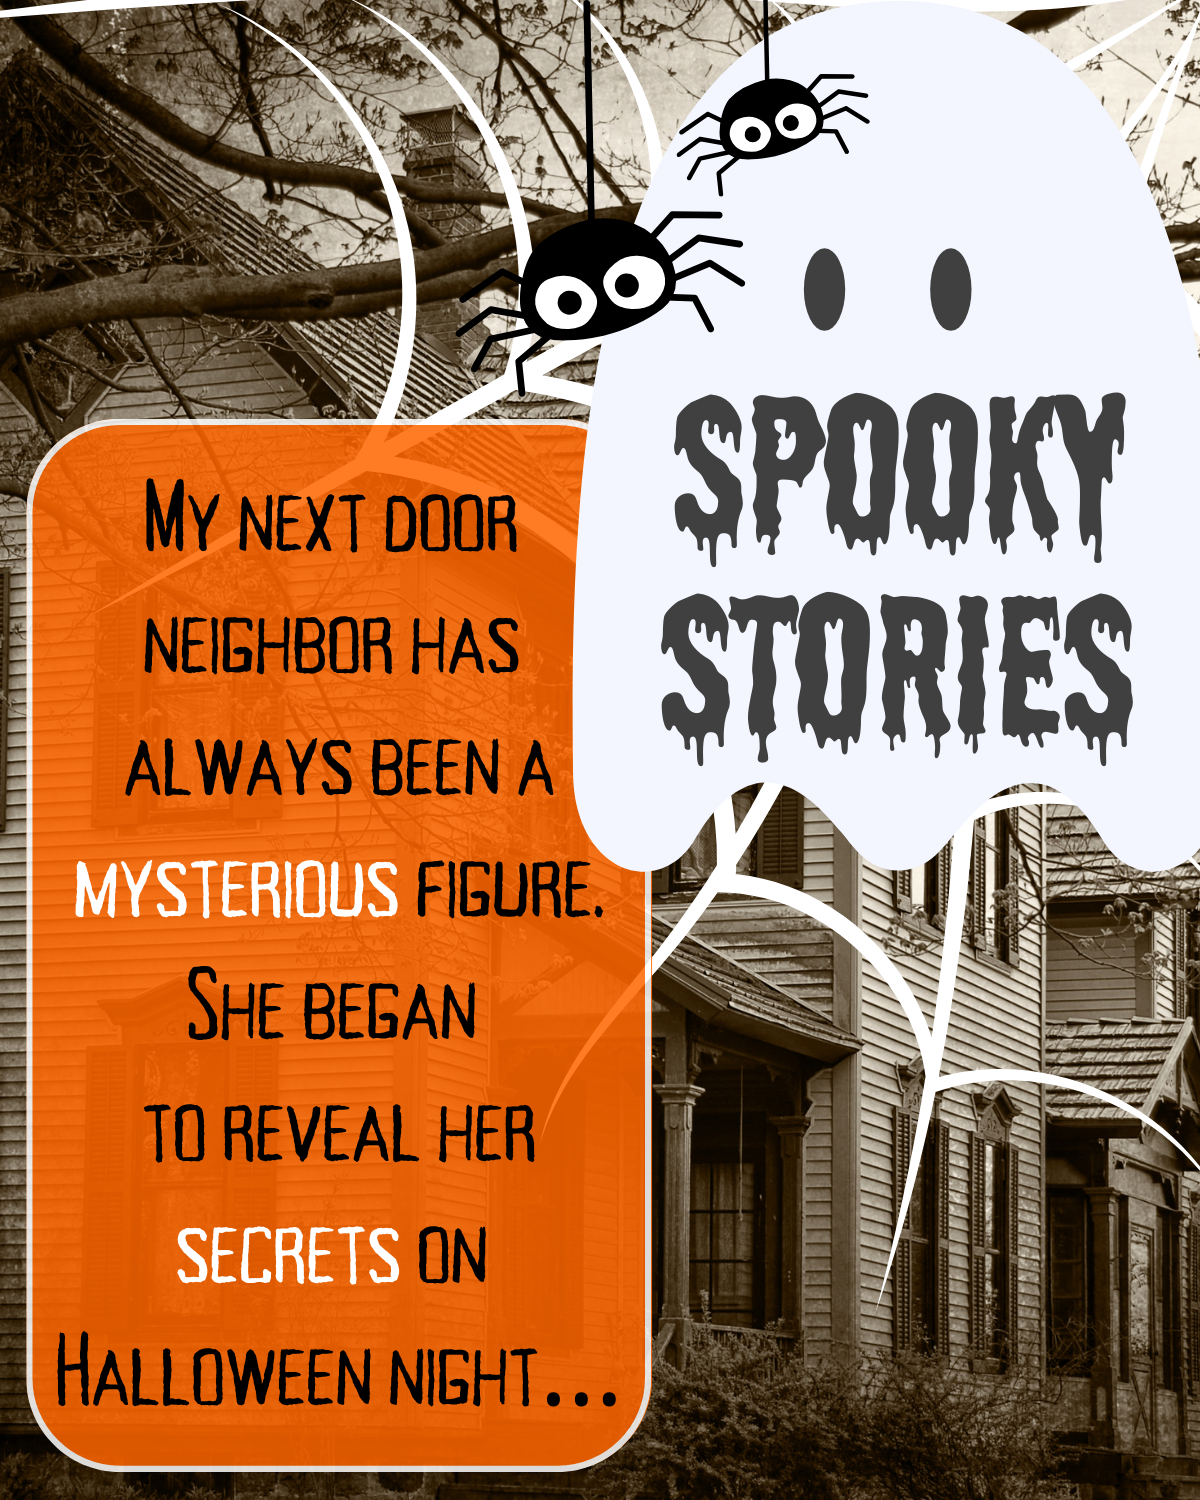 Spooky Story Submissions, finish the following prompt: My next-door neighbour has always been a mysterious figure. She began to reveal her secrets on Halloween night" My next-door neighbour has always been a mysterious figure. She began to reveal her secrets on Halloween night: "My next door neighbor has always been a mysterious figure. She began to reveal her secrets on Halloween night...." 